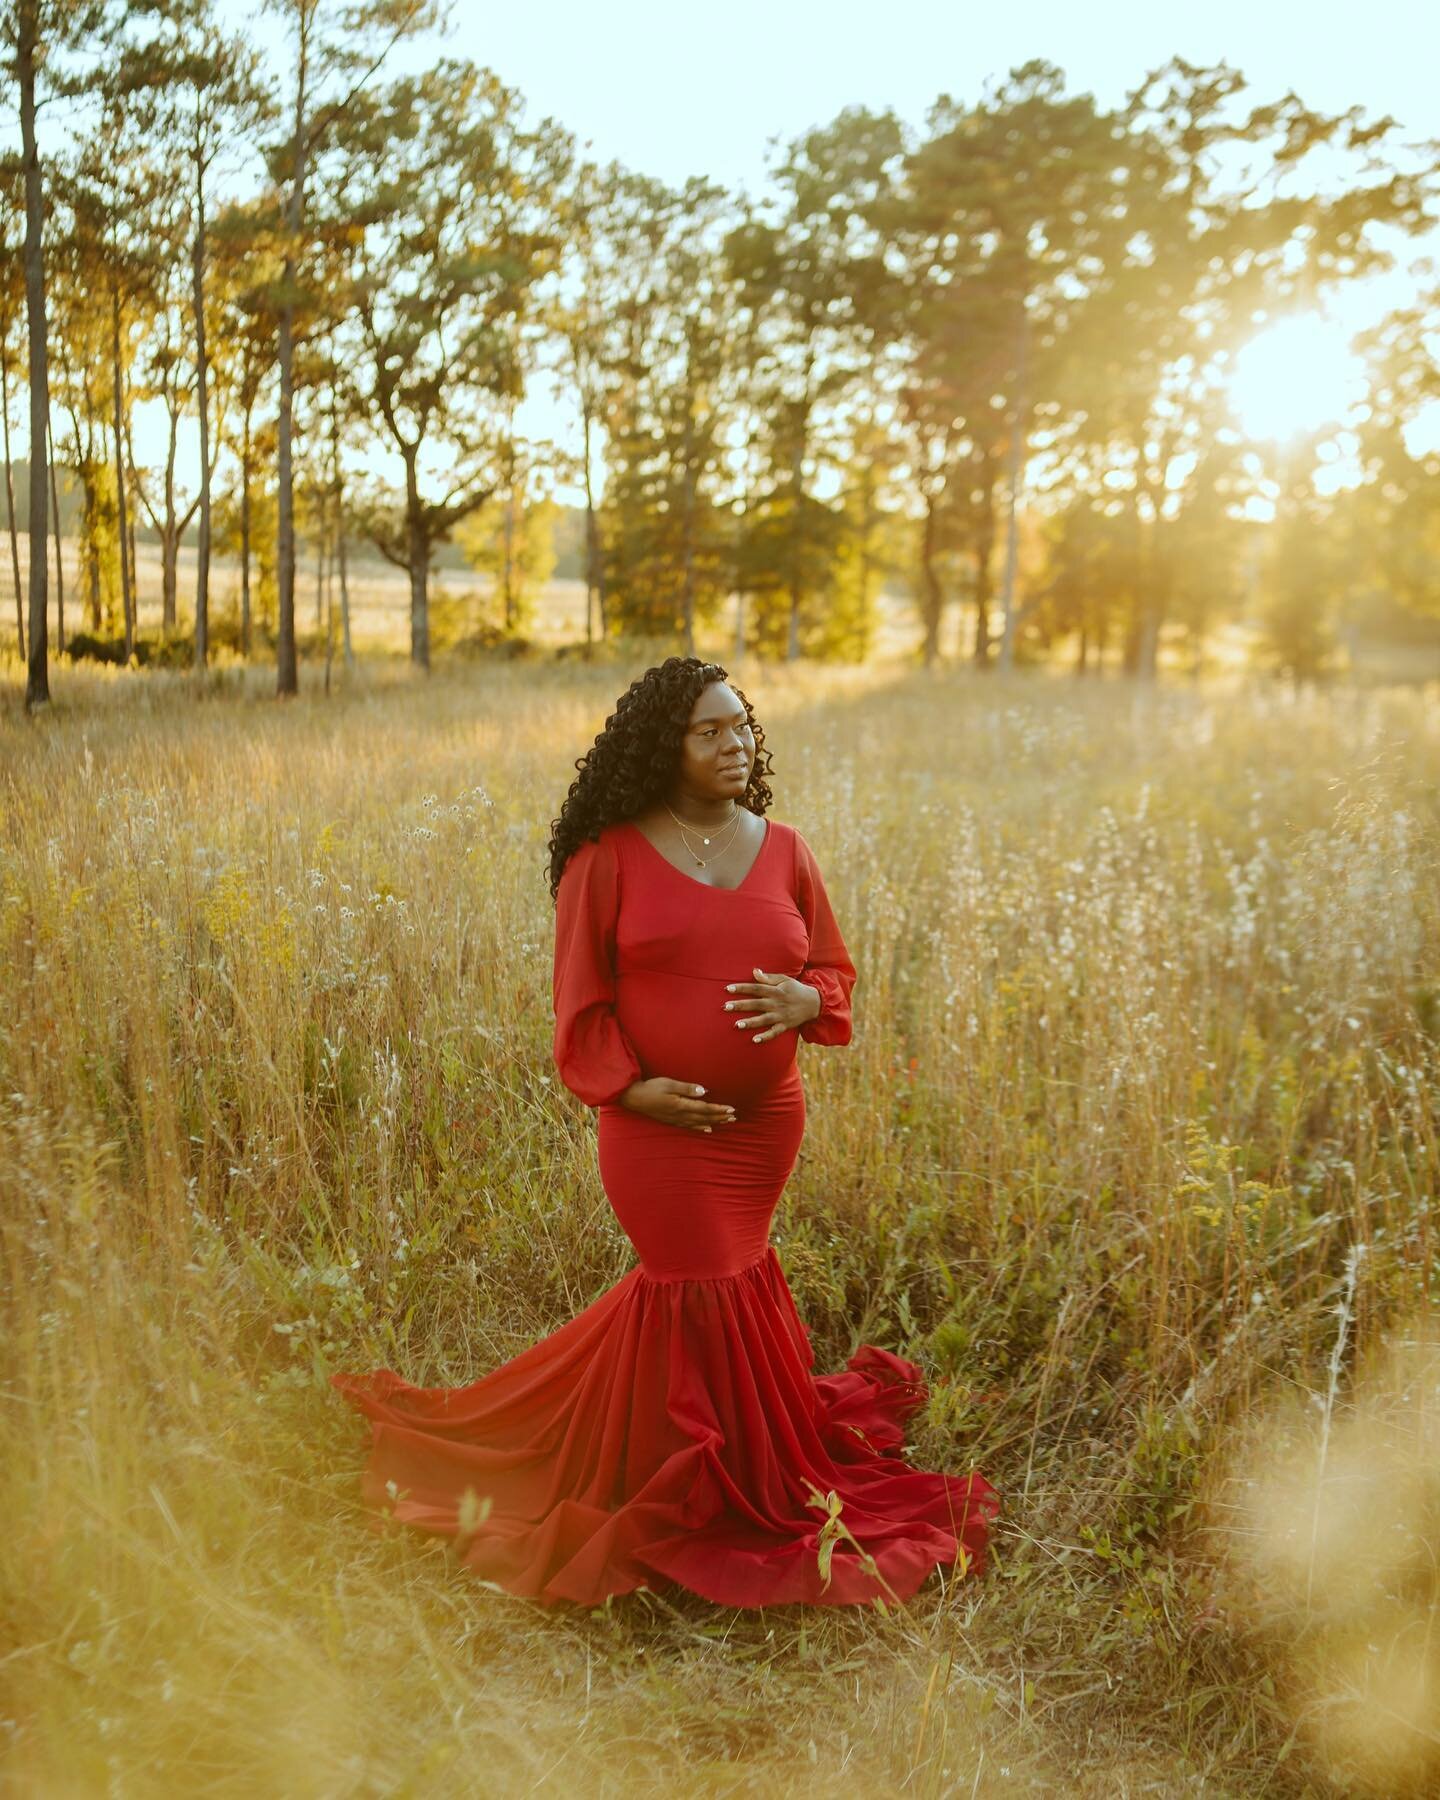 &ldquo;I will love you recklessly,
without words or empty phrases. I will love with blazing truth
and hopeless defiance and
unapologetic beauty.
I will love you forever and even
still when forever runs out.&quot;
_

#maternityphotography #maternitysh